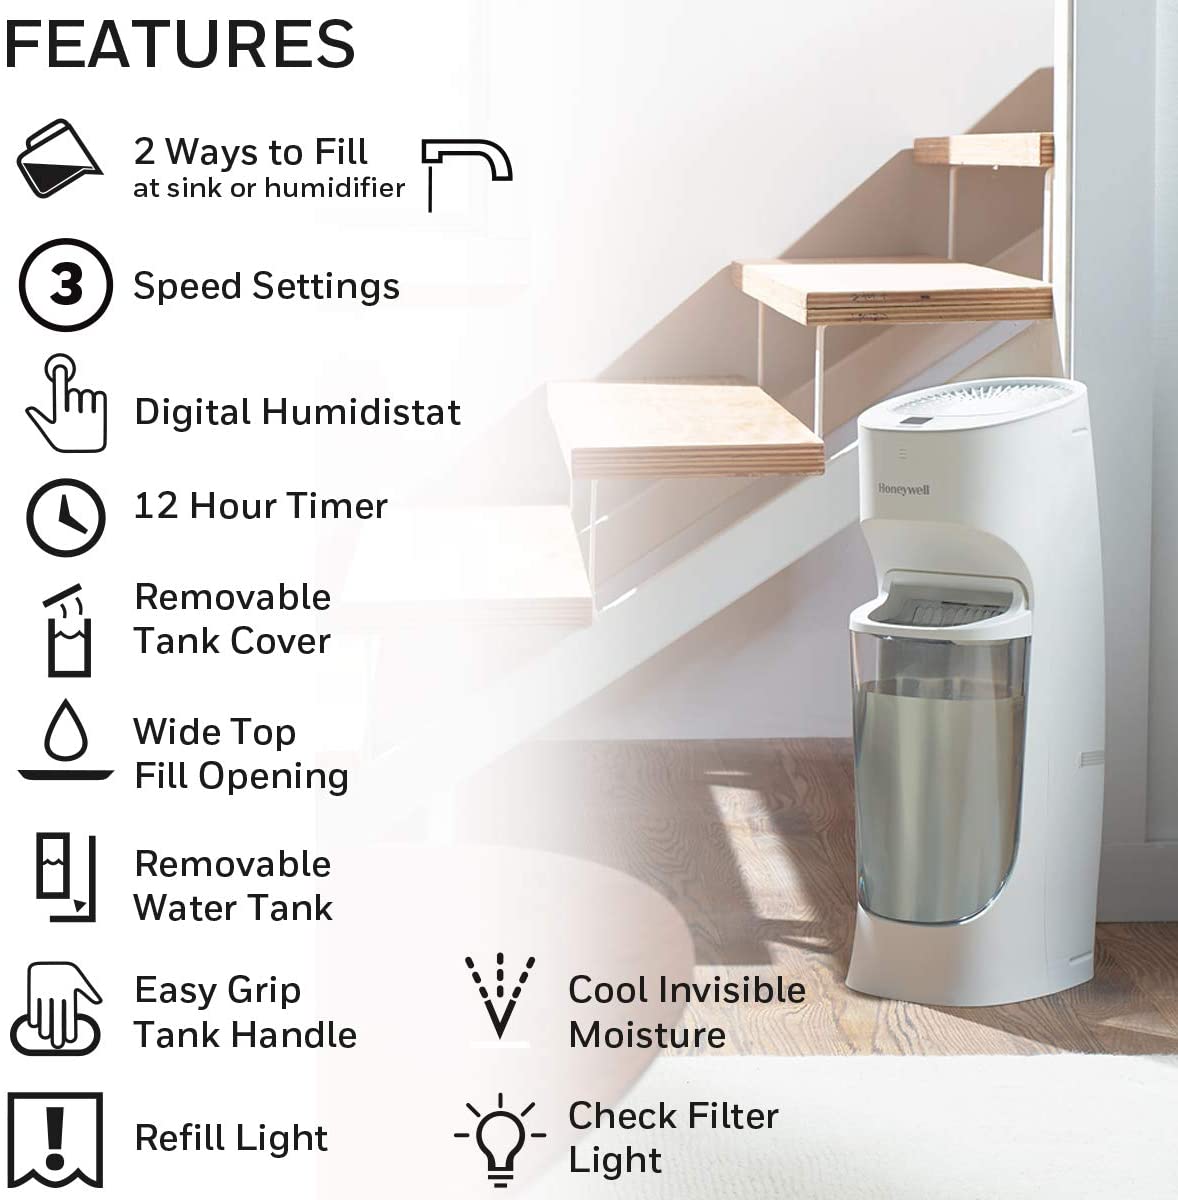 Honeywell HEV620W Humidifier Review